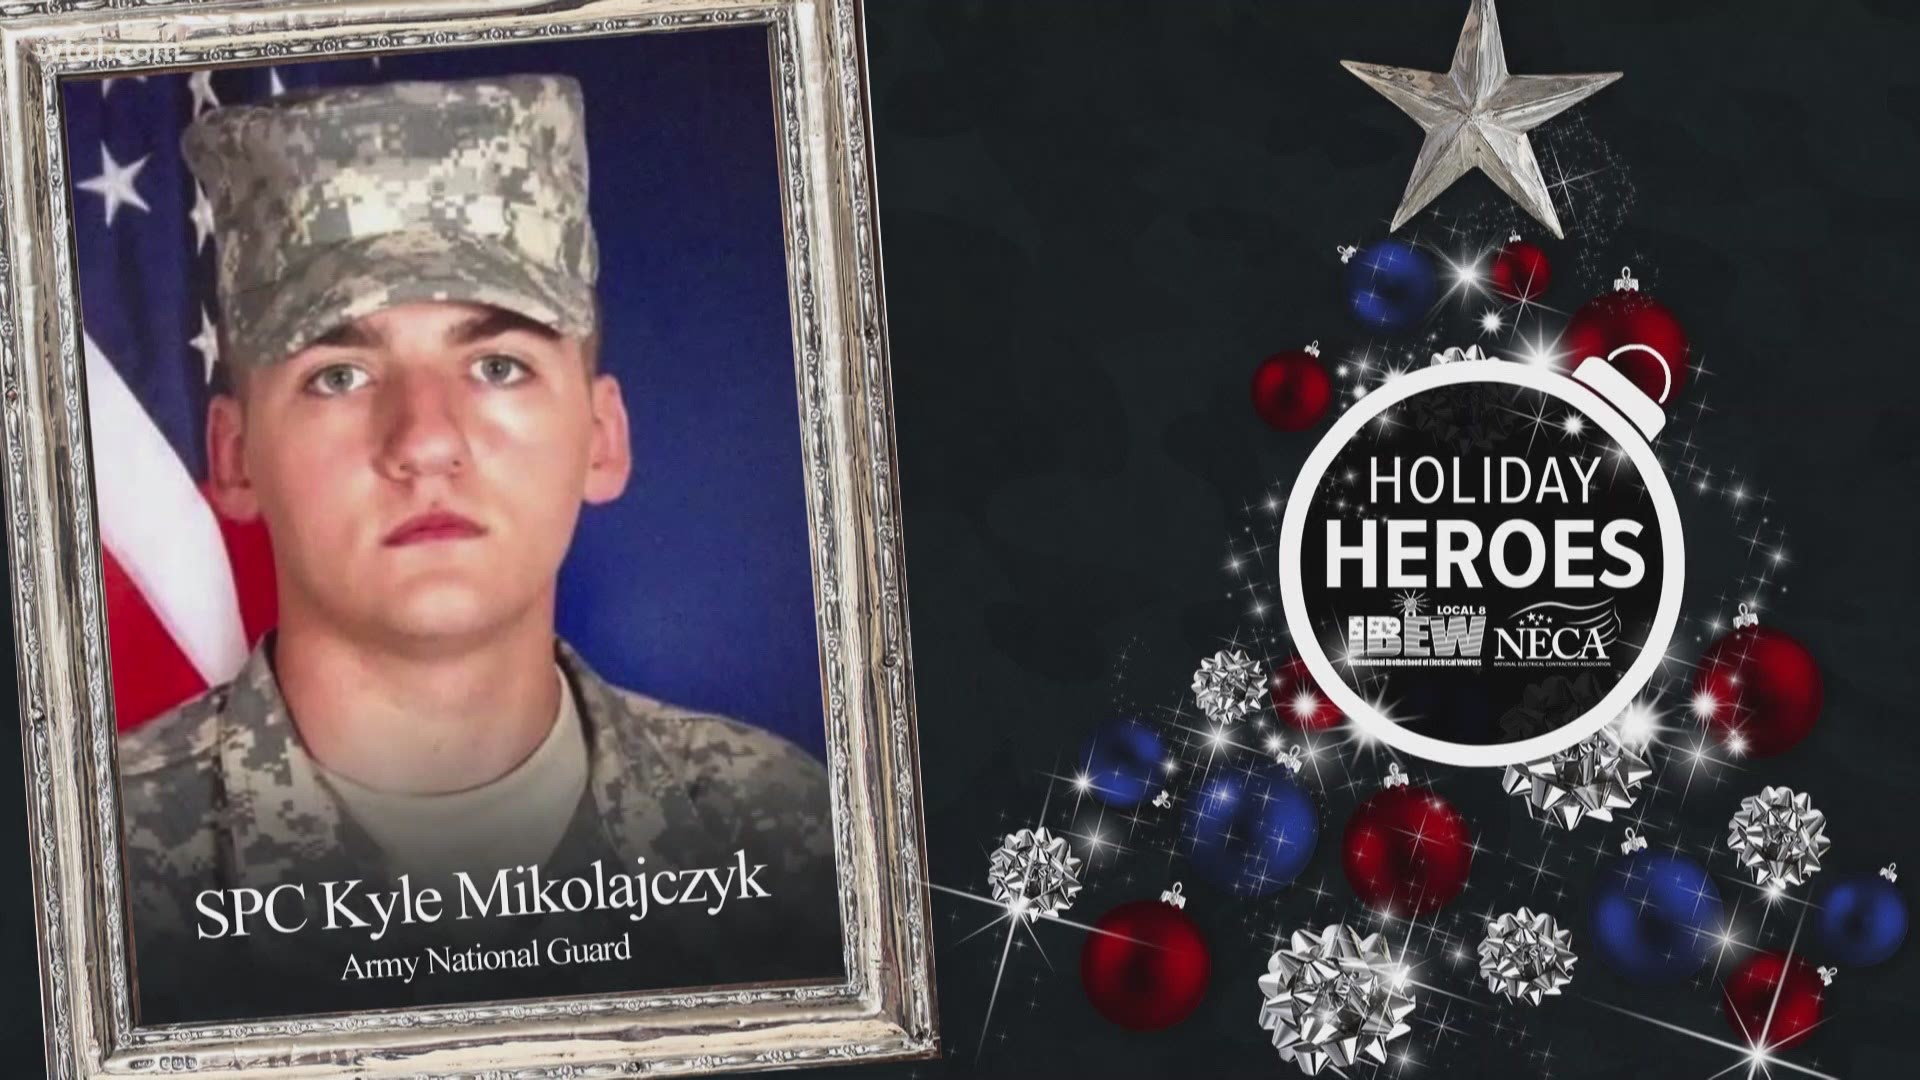 Let's take a moment now to honor Thursday's holiday hero, Spc. Kyle Mikolajczyk.